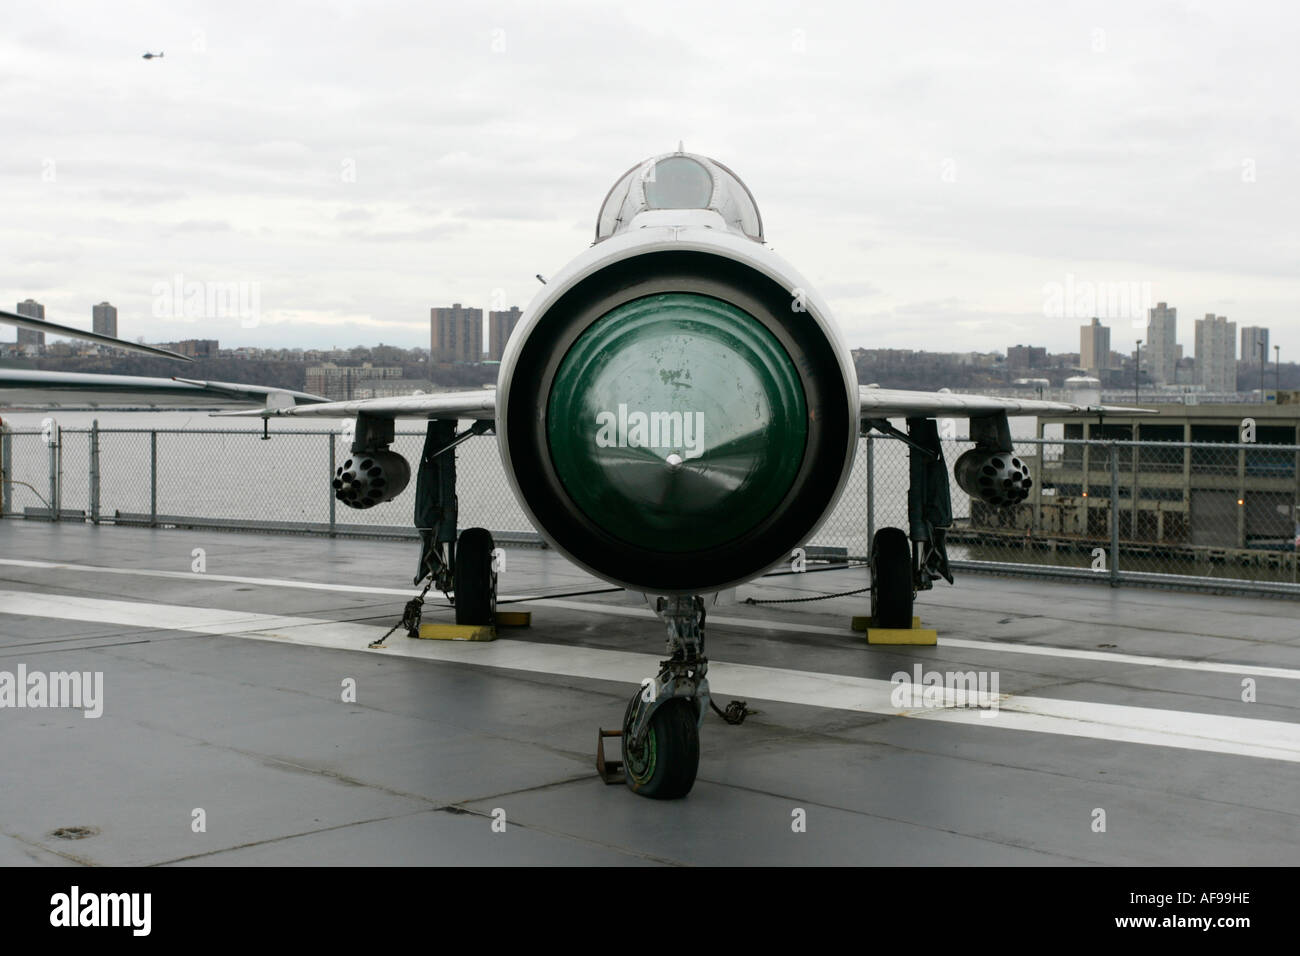 Polish air force Mig 21 PFM on display on the flight deck at the Intrepid Sea Air Space Museum new york city new york USA Stock Photo